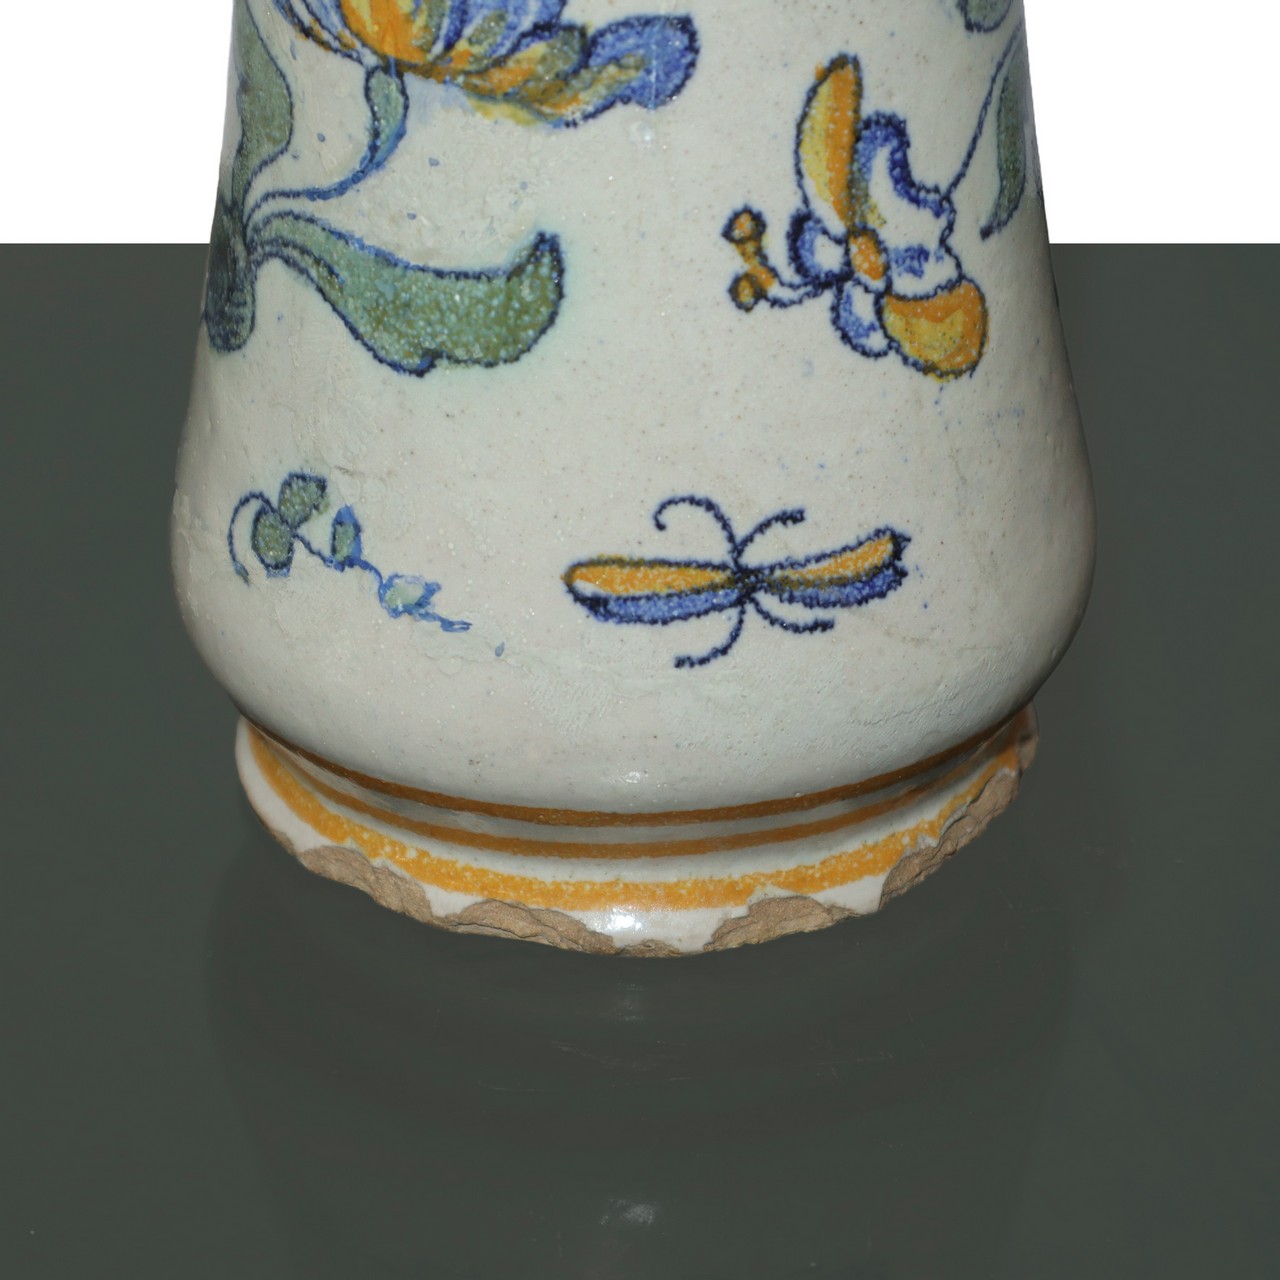 Neapolitan majolica albarello painted with flowers and butterflies, 18th century - Image 3 of 3